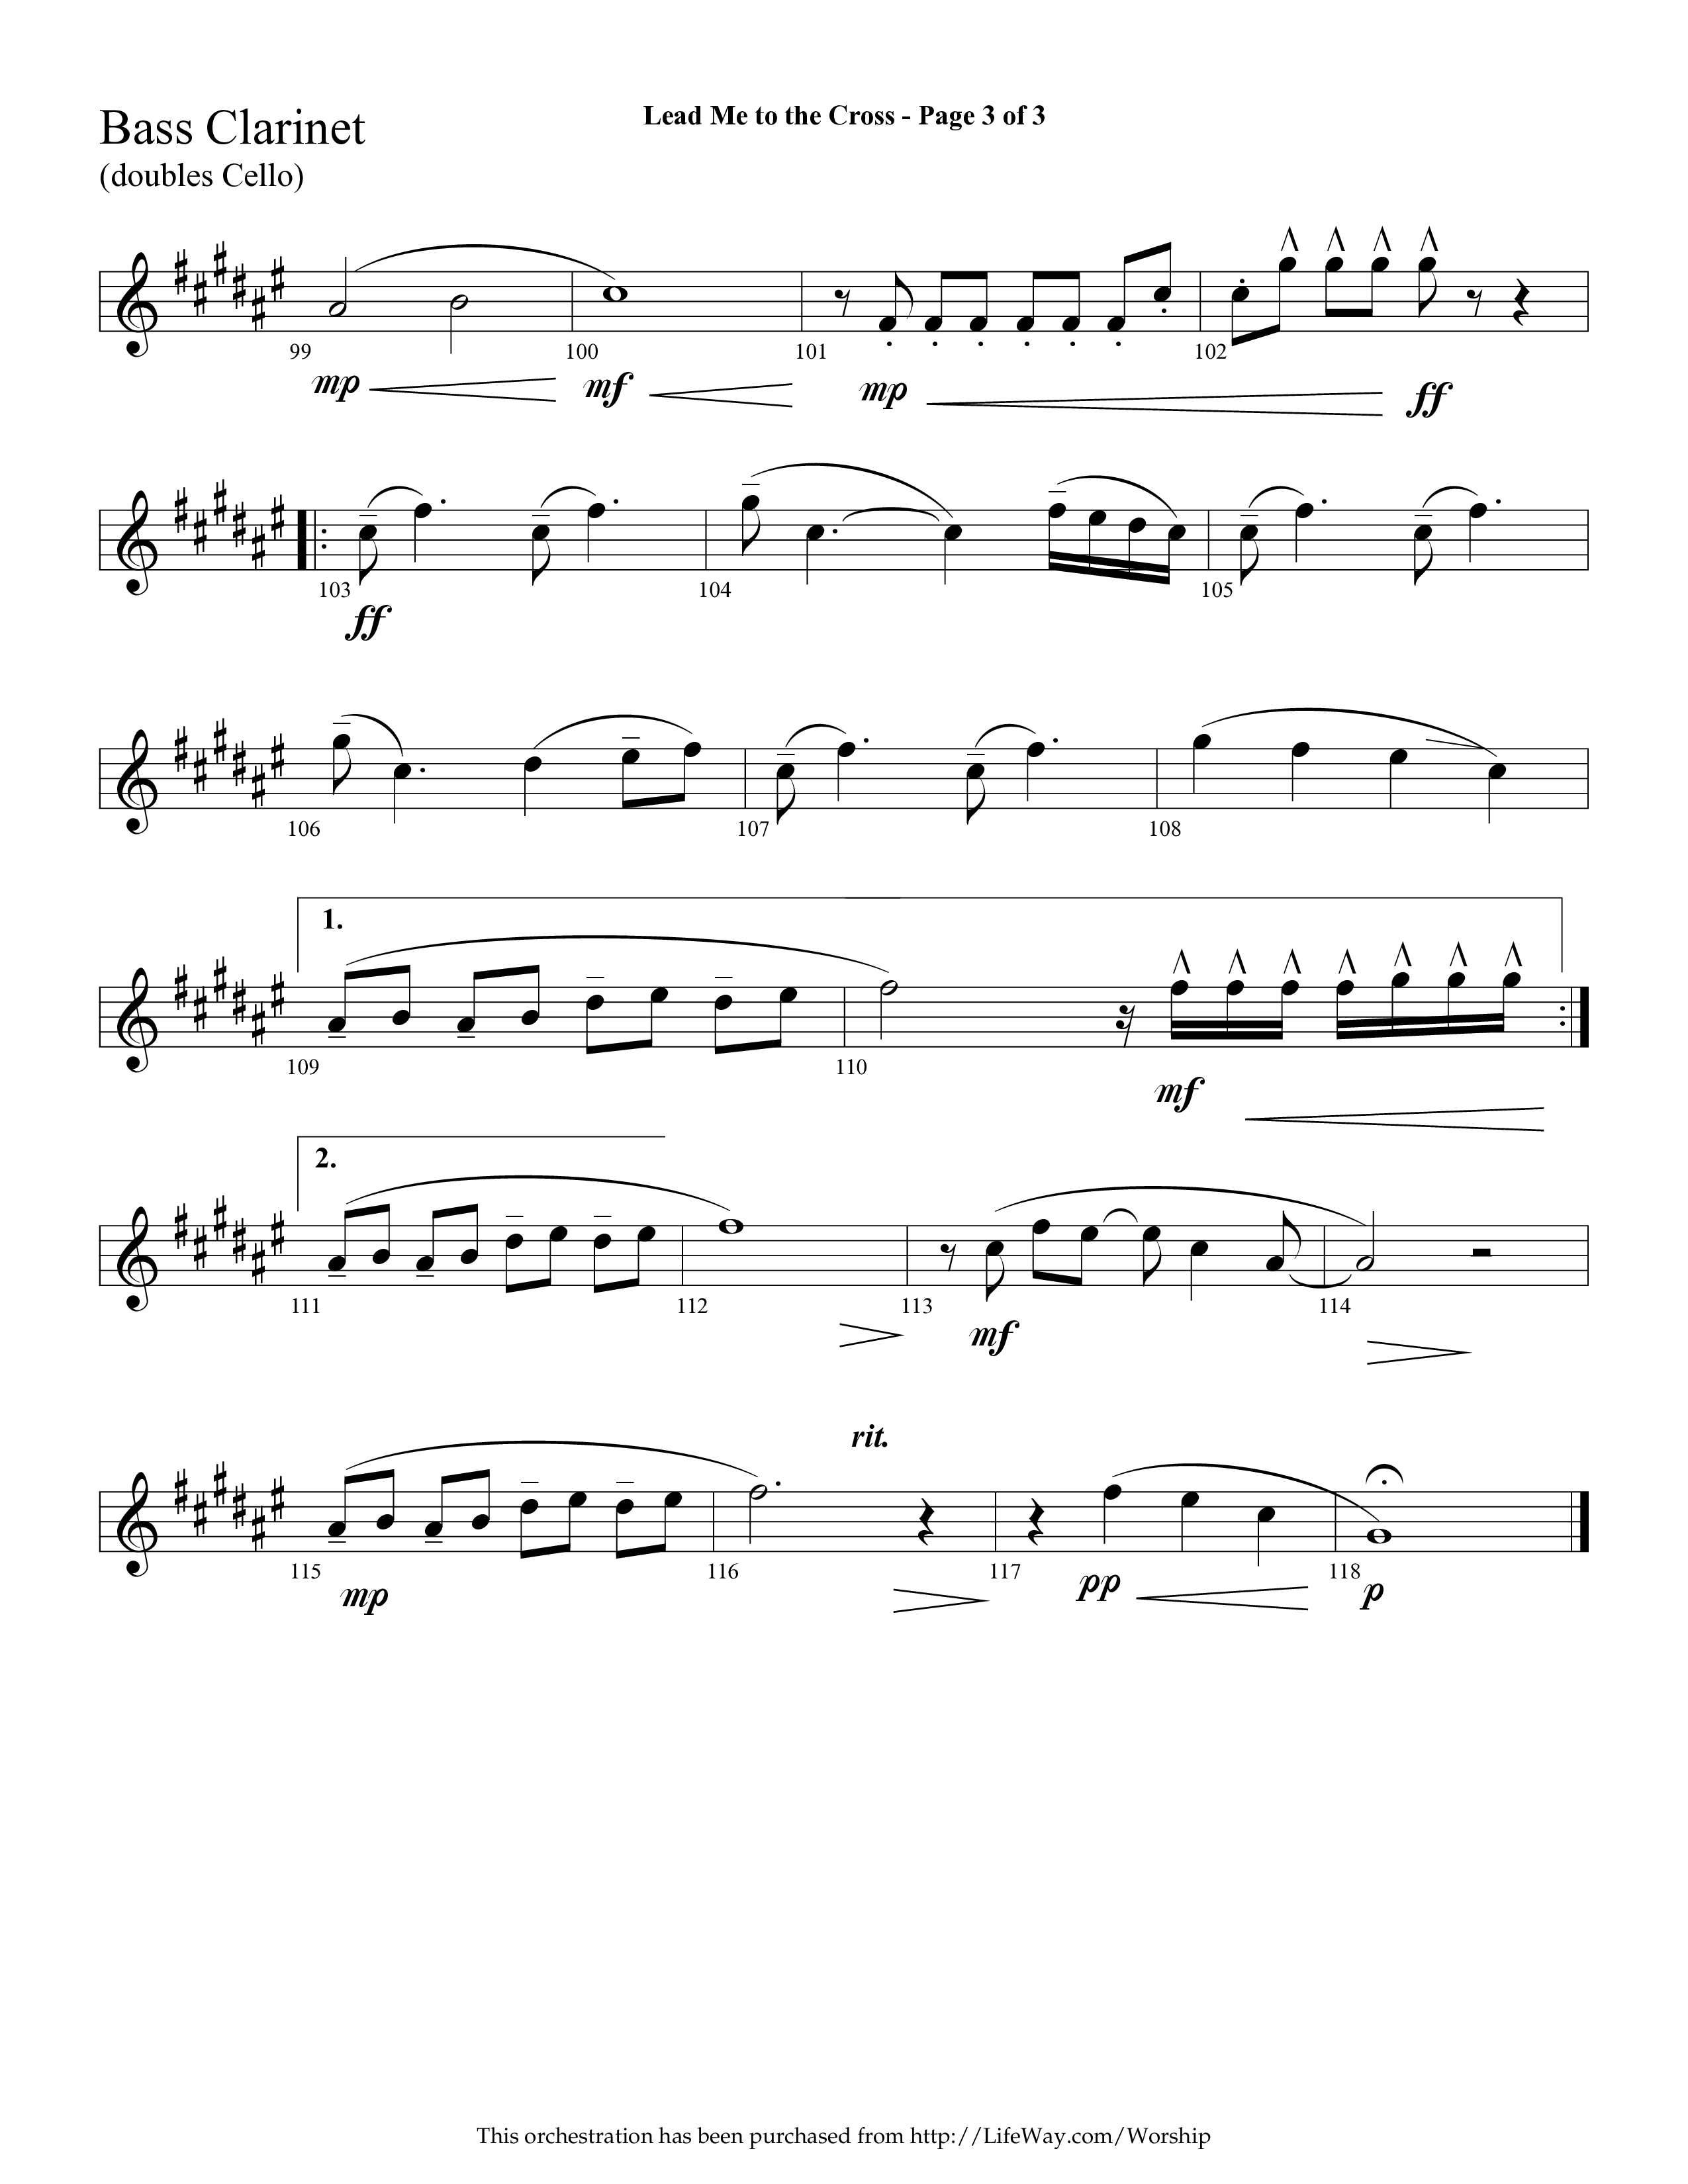 Lead Me To The Cross (Choral Anthem SATB) Bass Clarinet (Lifeway Choral / Arr. Cliff Duren)